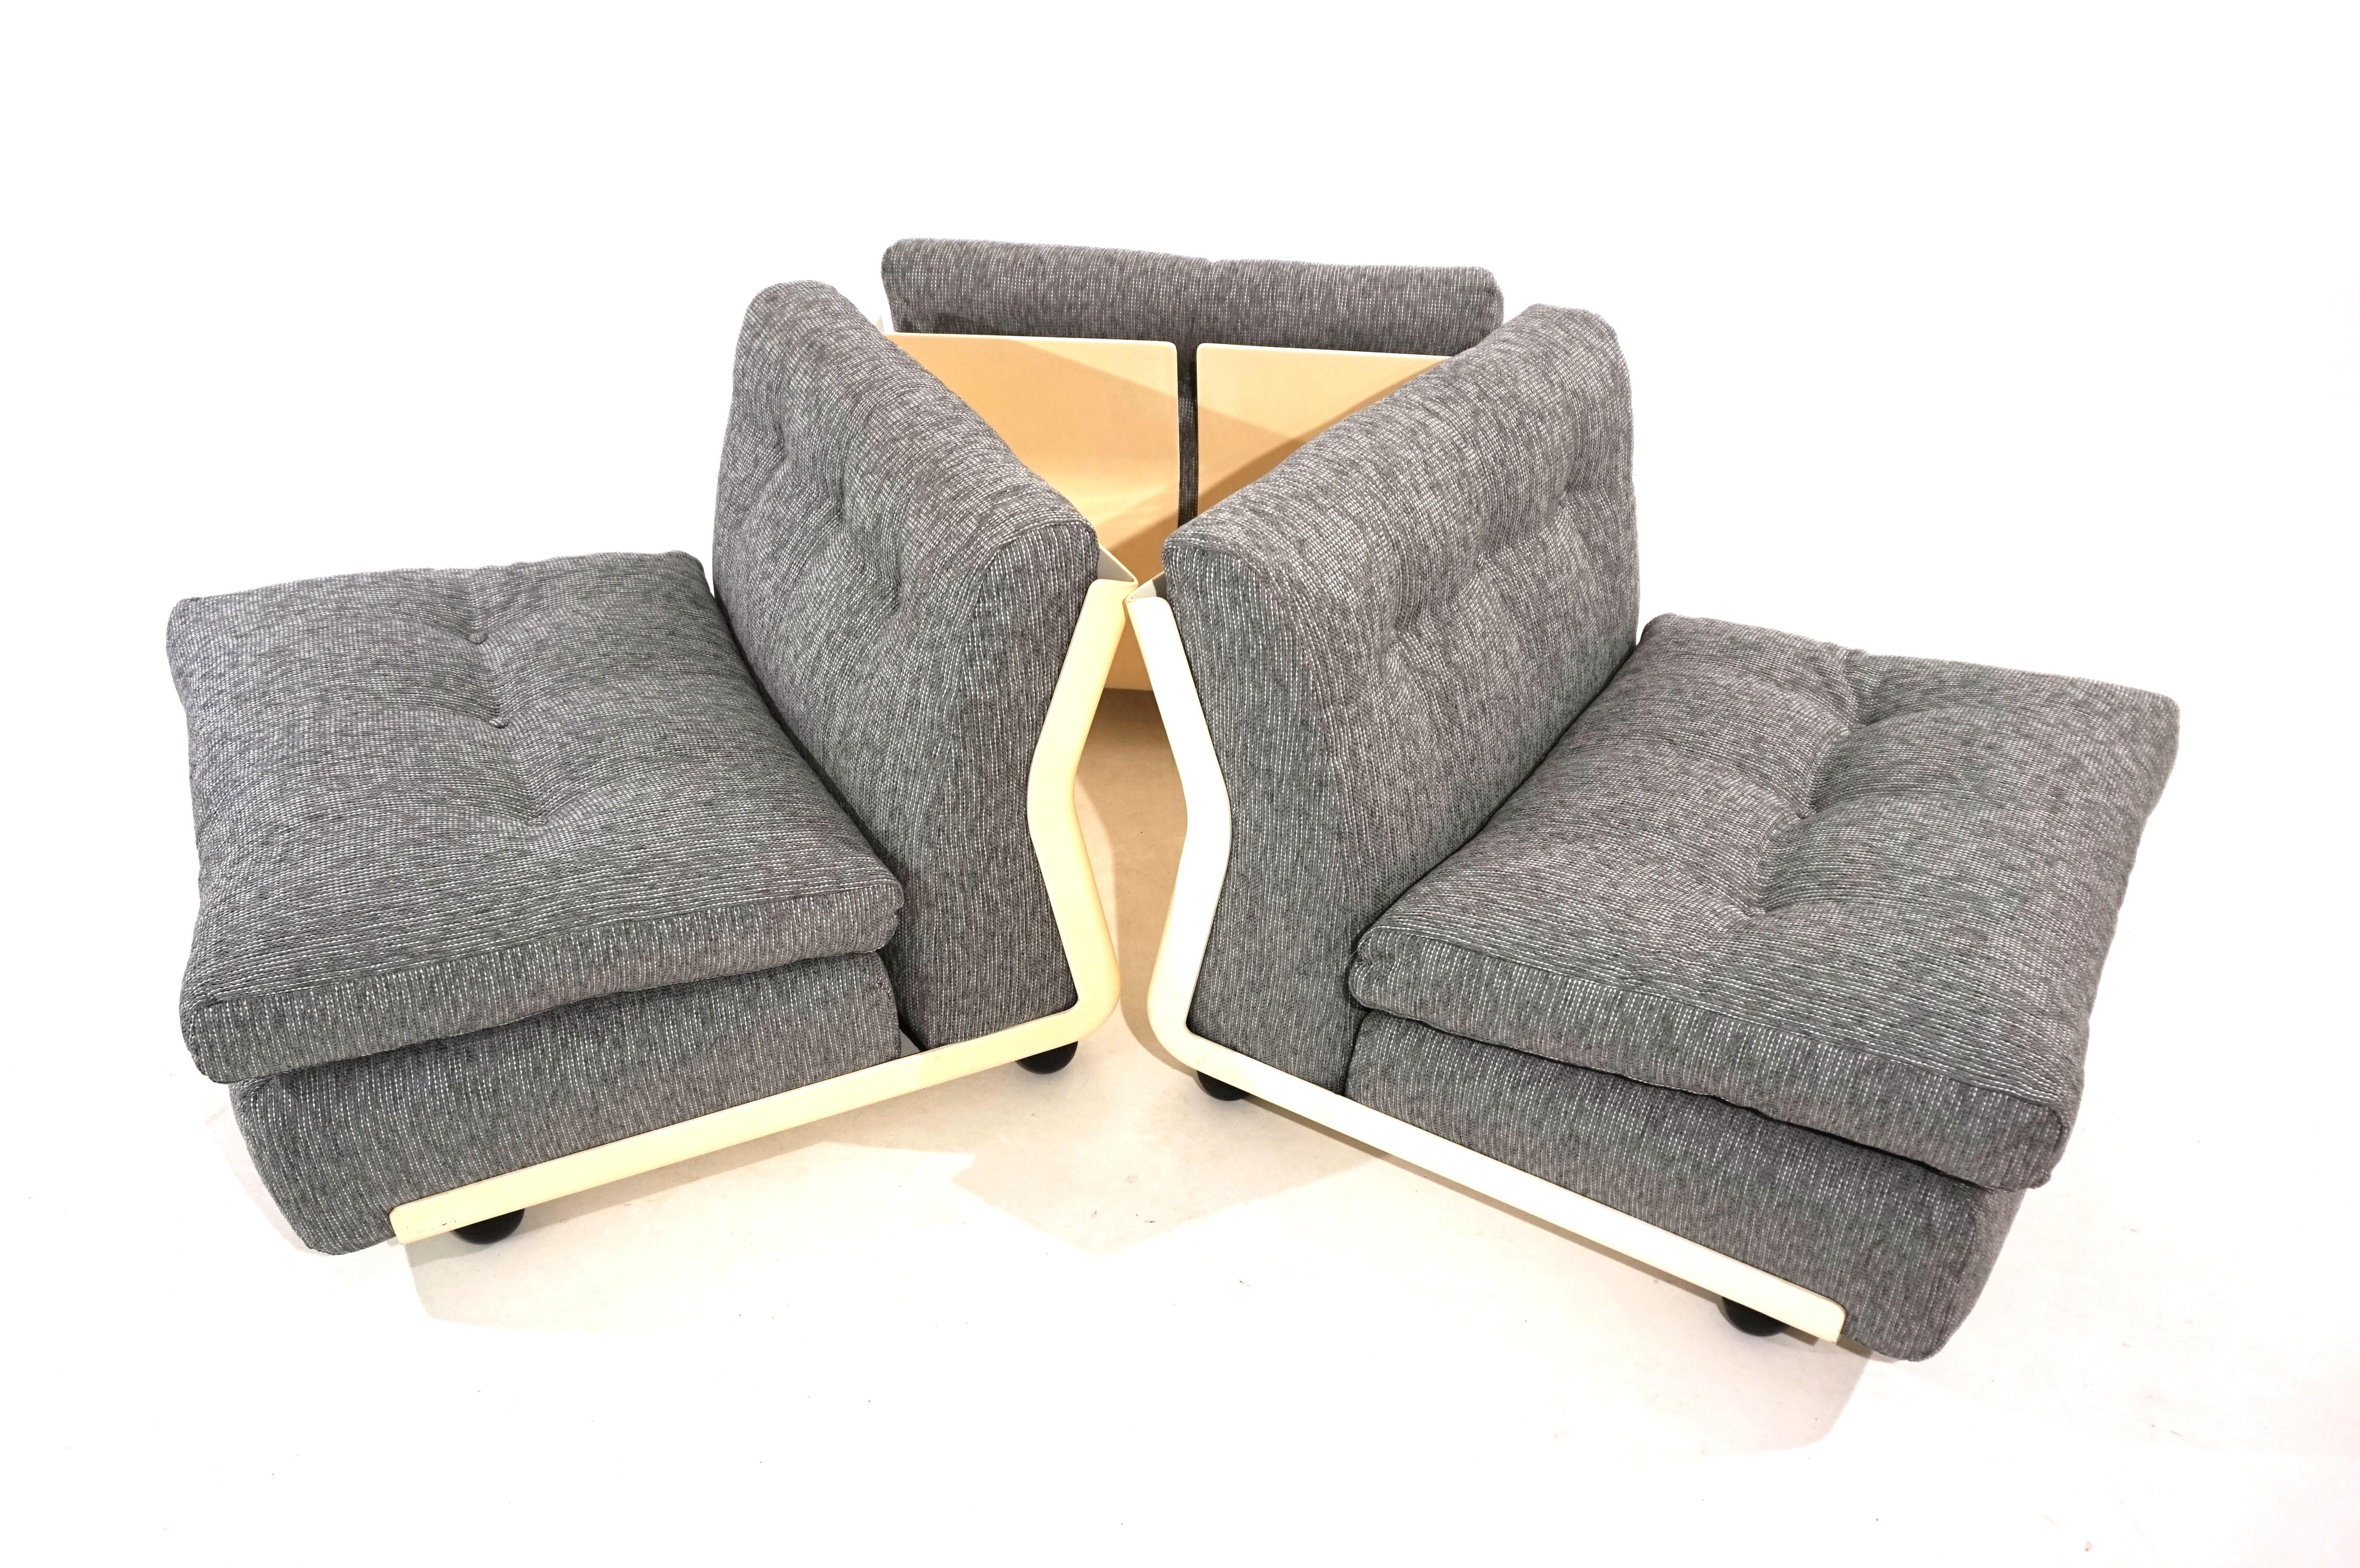 Set of 3 C&B Italia Amanta lounge chairs by Mario Bellini For Sale 2